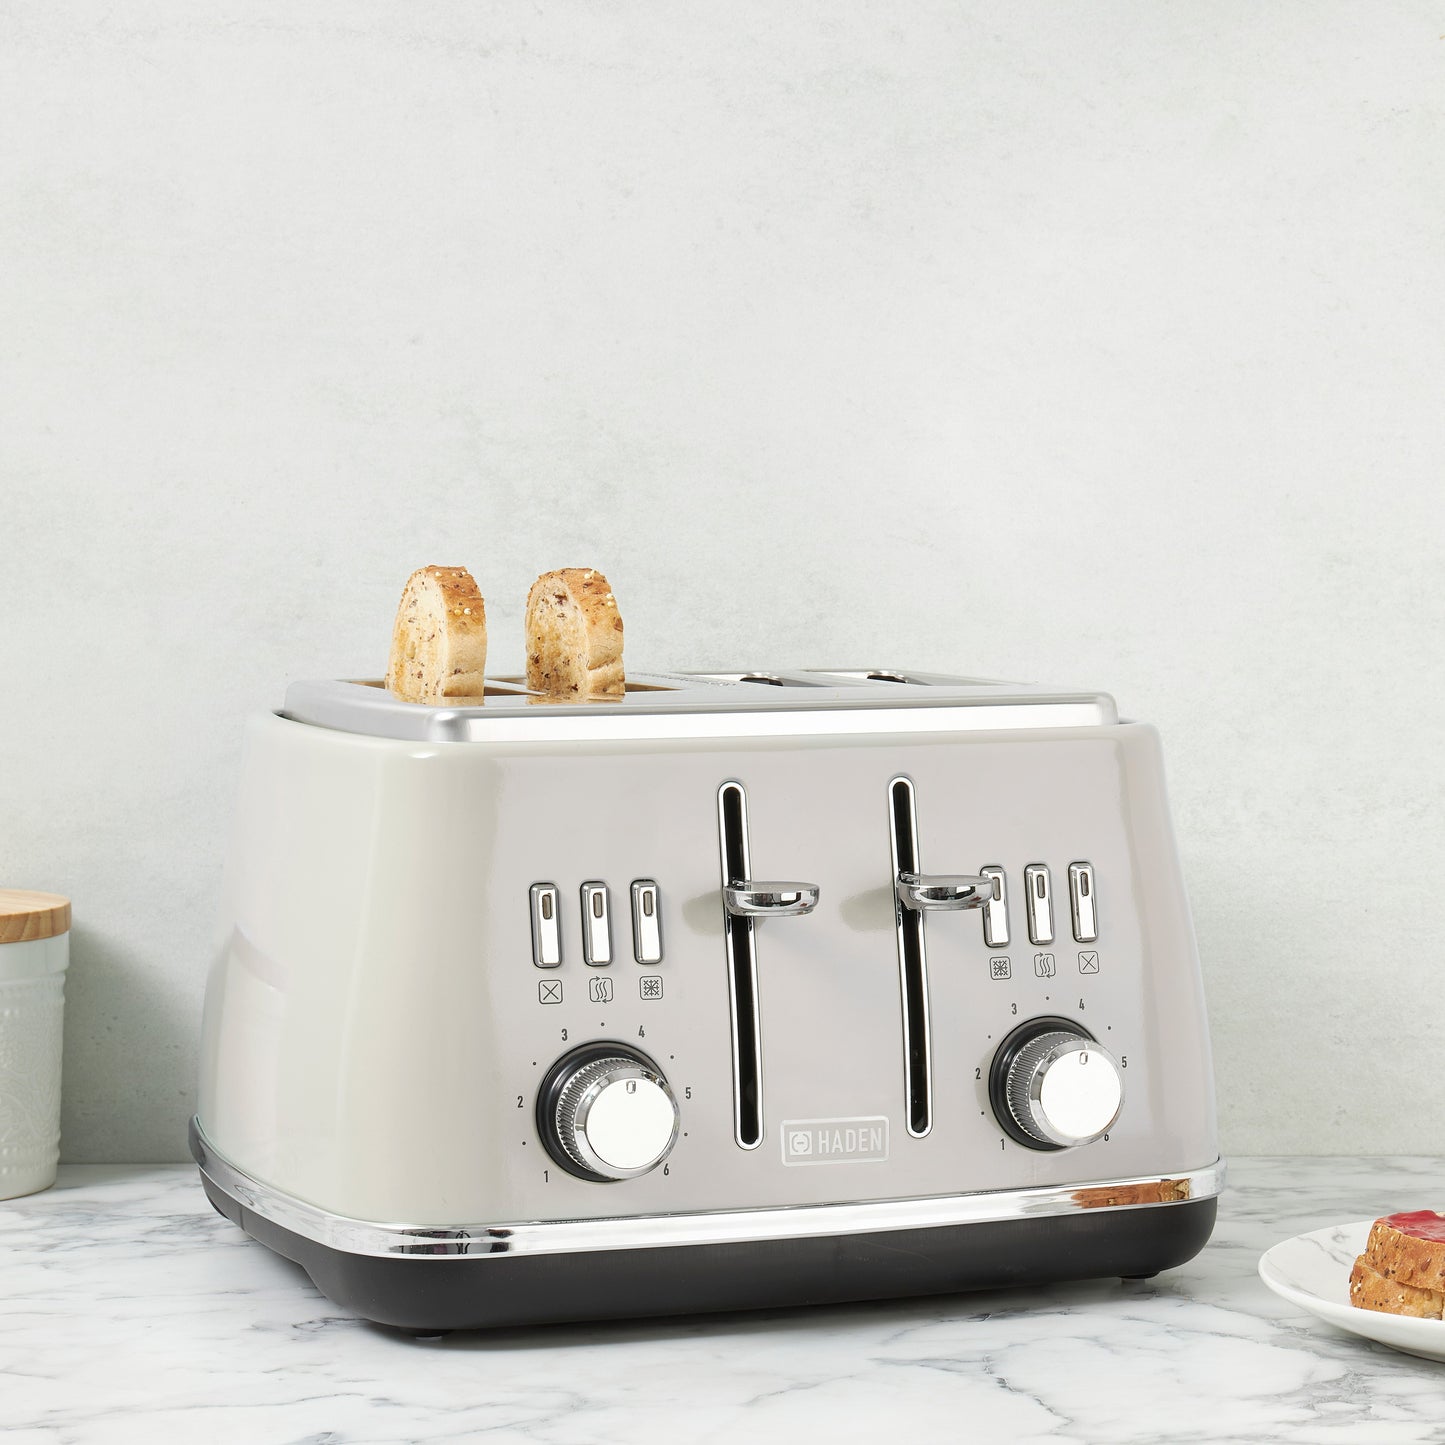 Haden Cotswold 4 Slice Putty Toaster